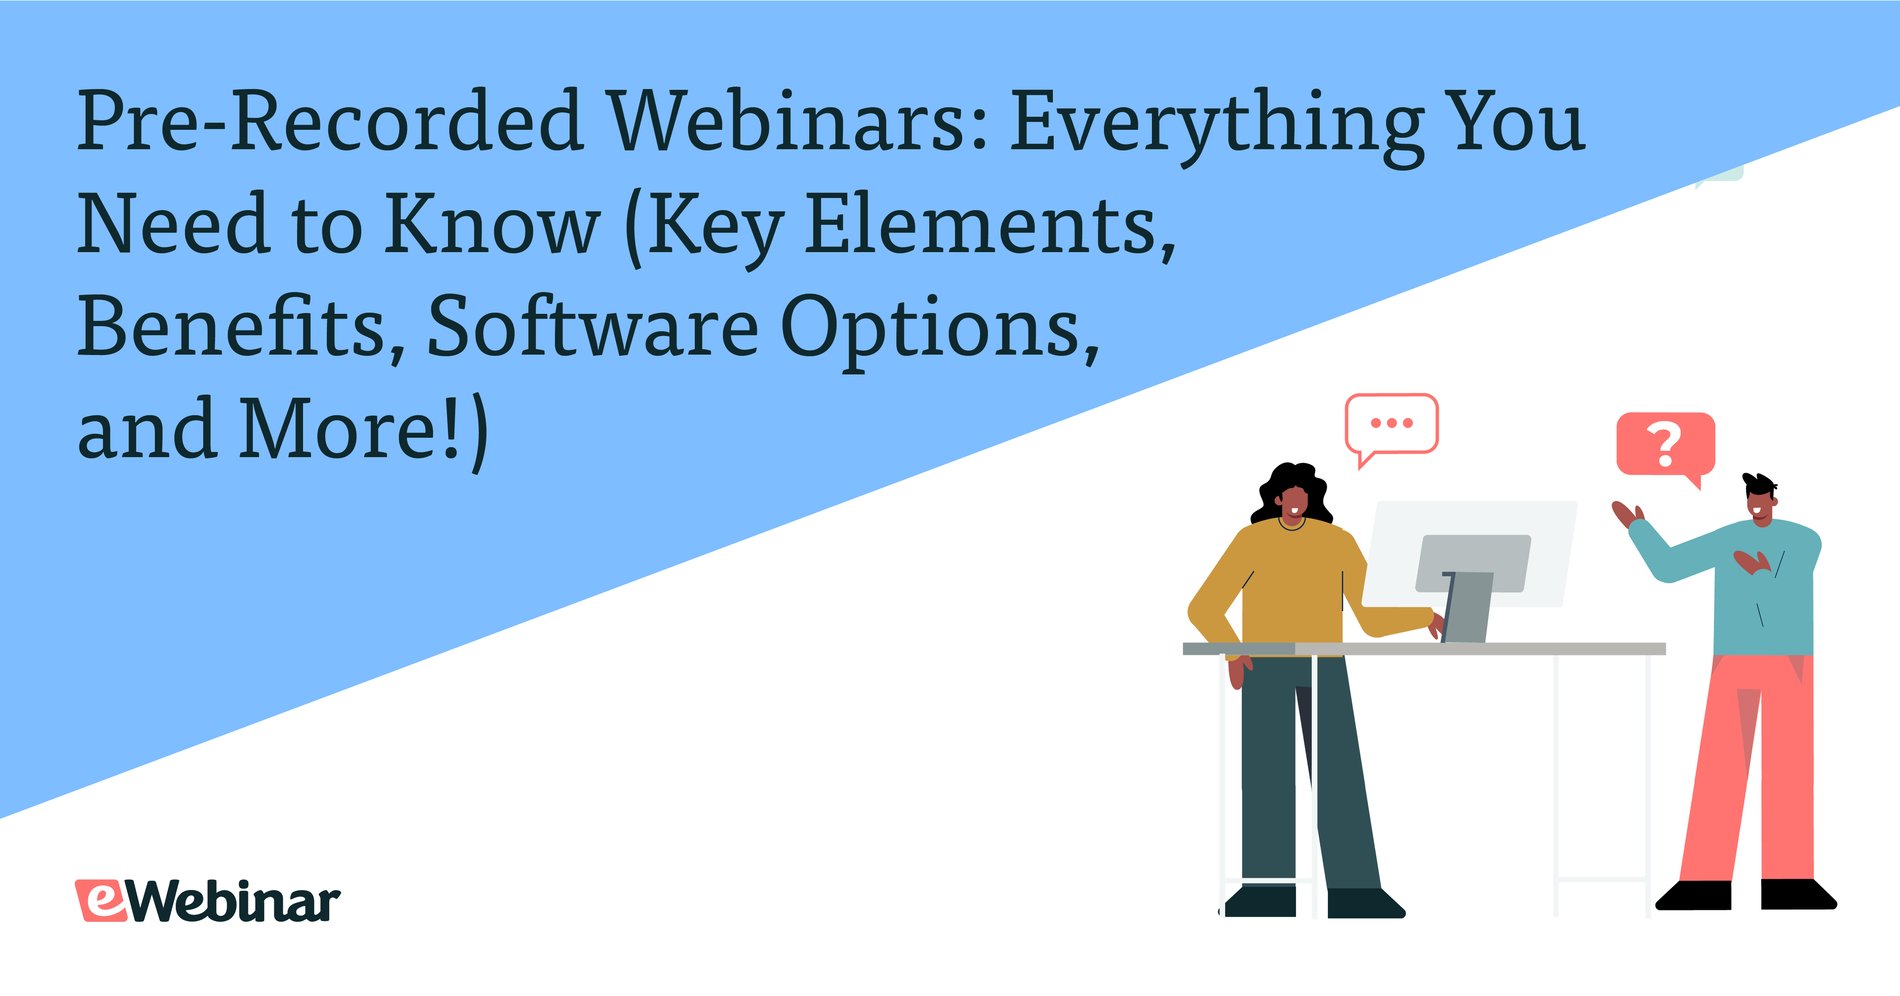 Pre-Recorded Webinars: Everything You Need to Know (Benefits, Types, and Use Cases)